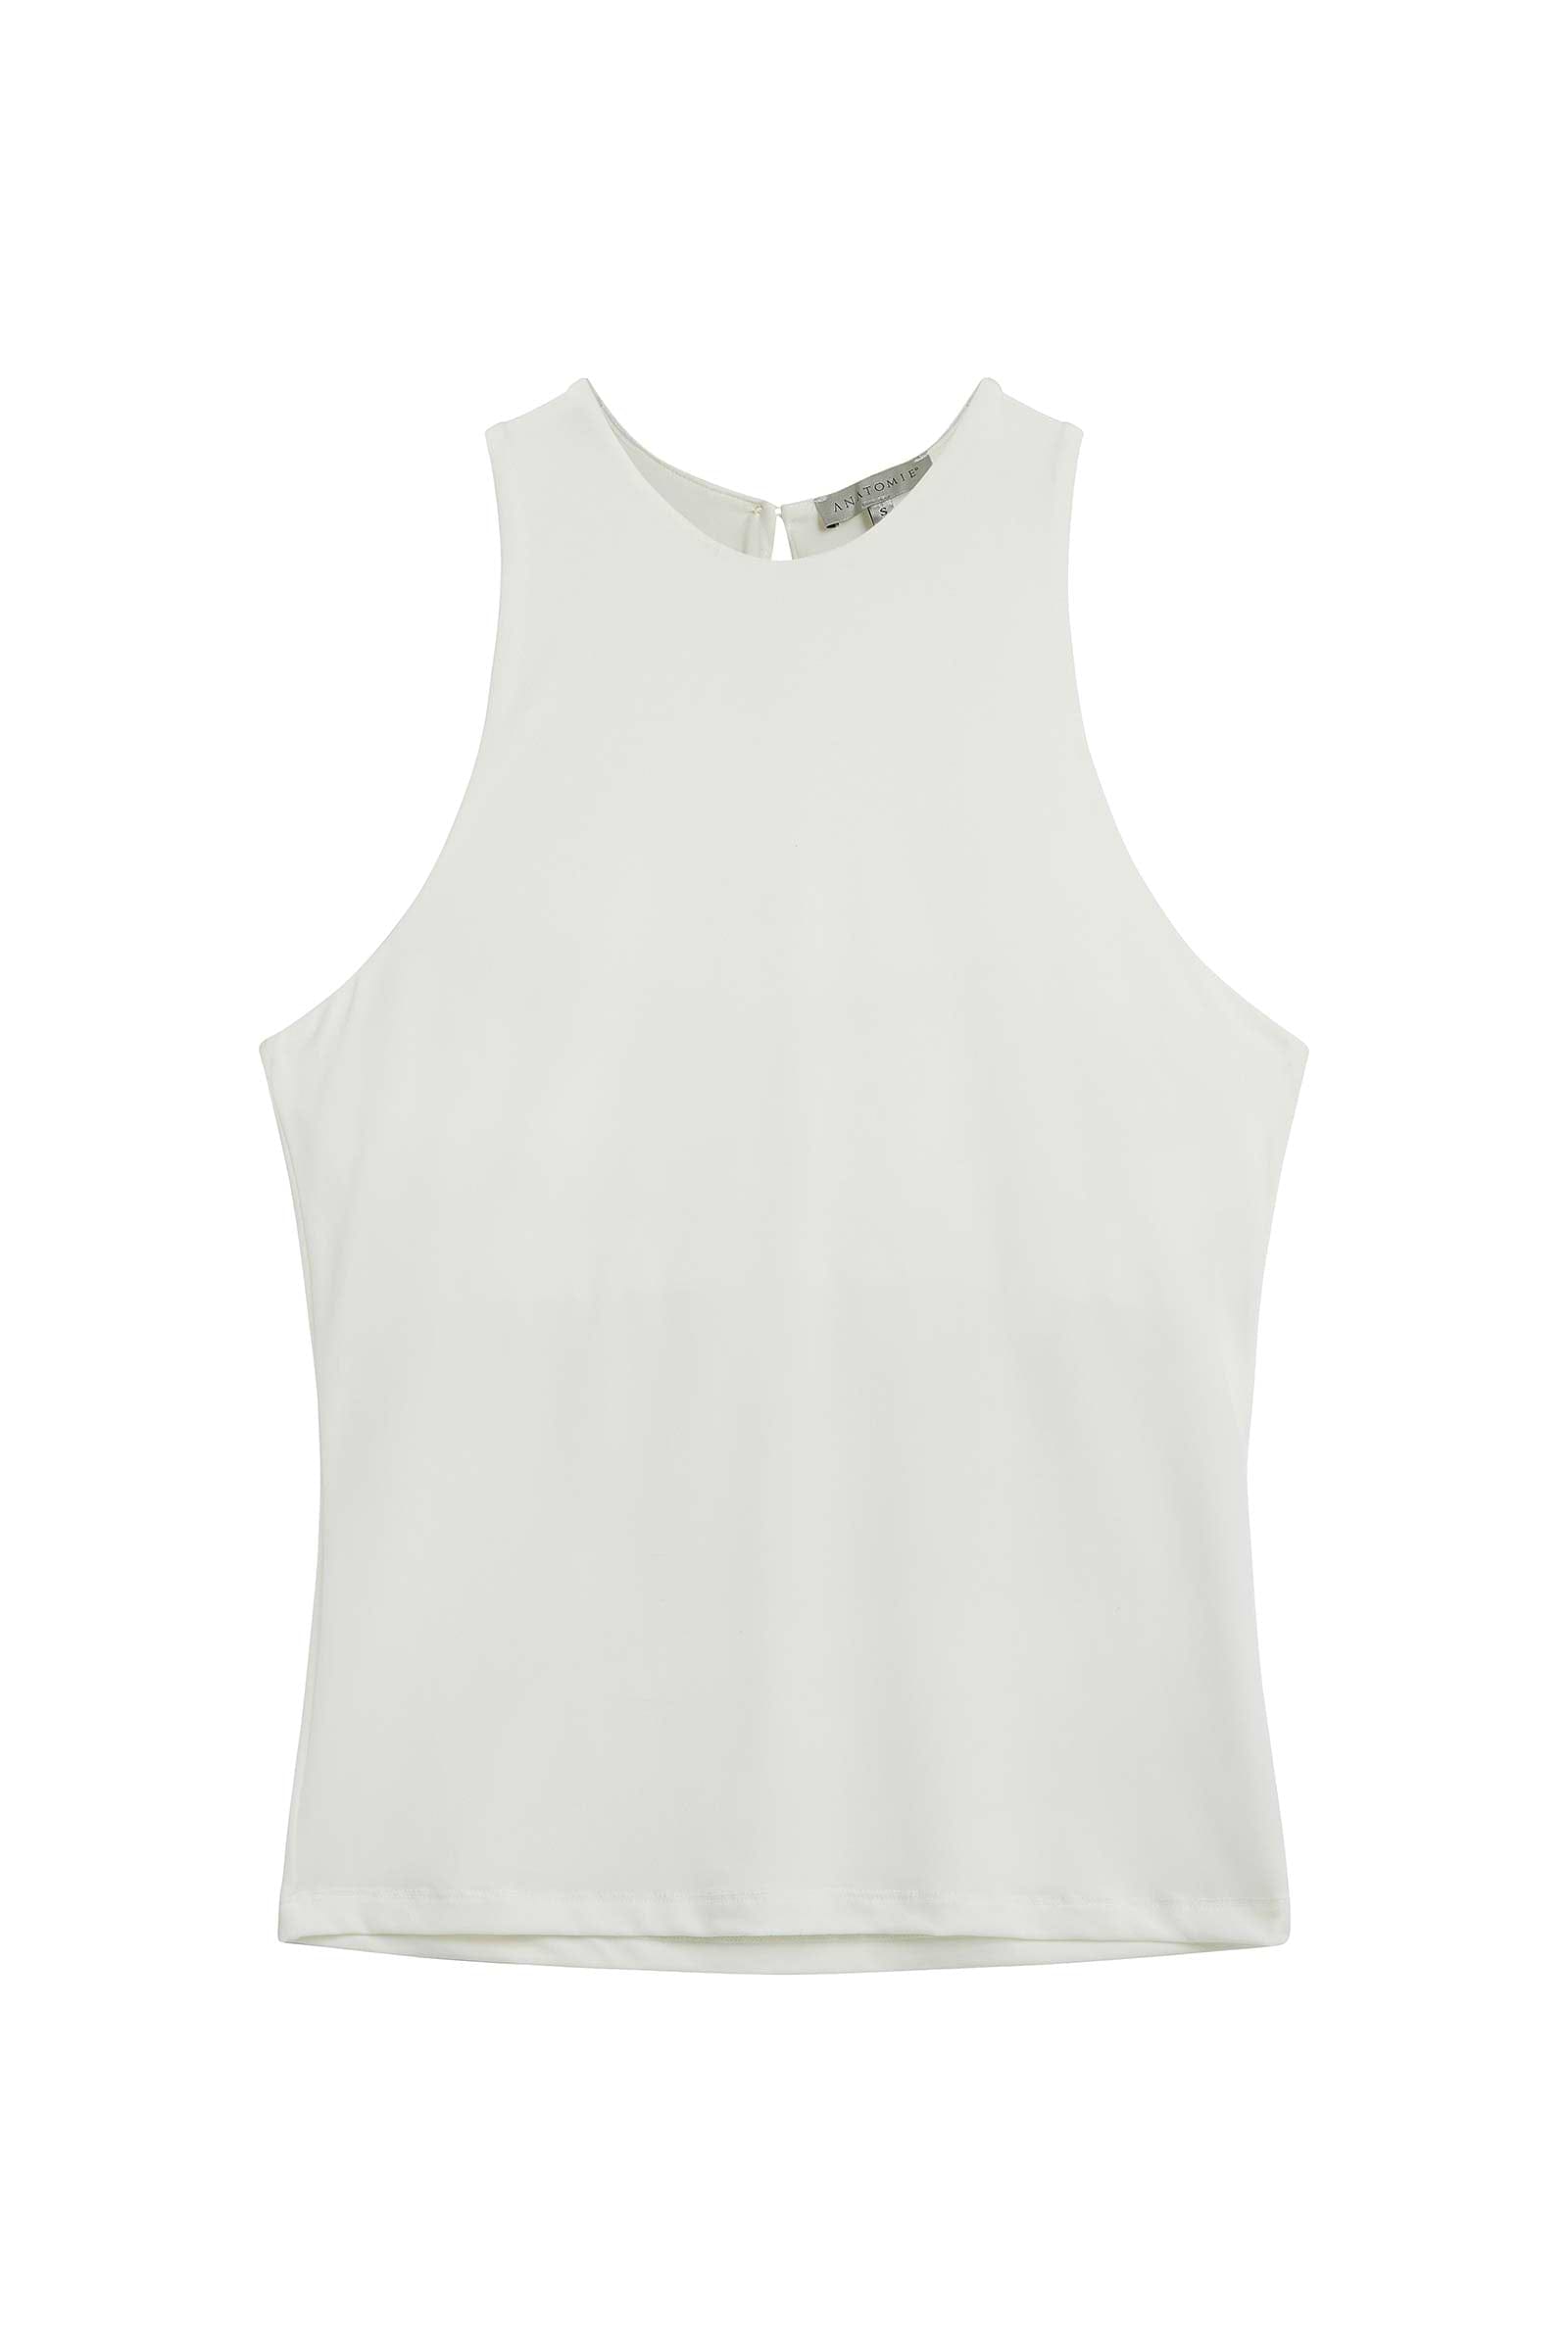 The Best Travel Top. Flat Lay of the Cami Wrinkle Free Travel Tank in White.